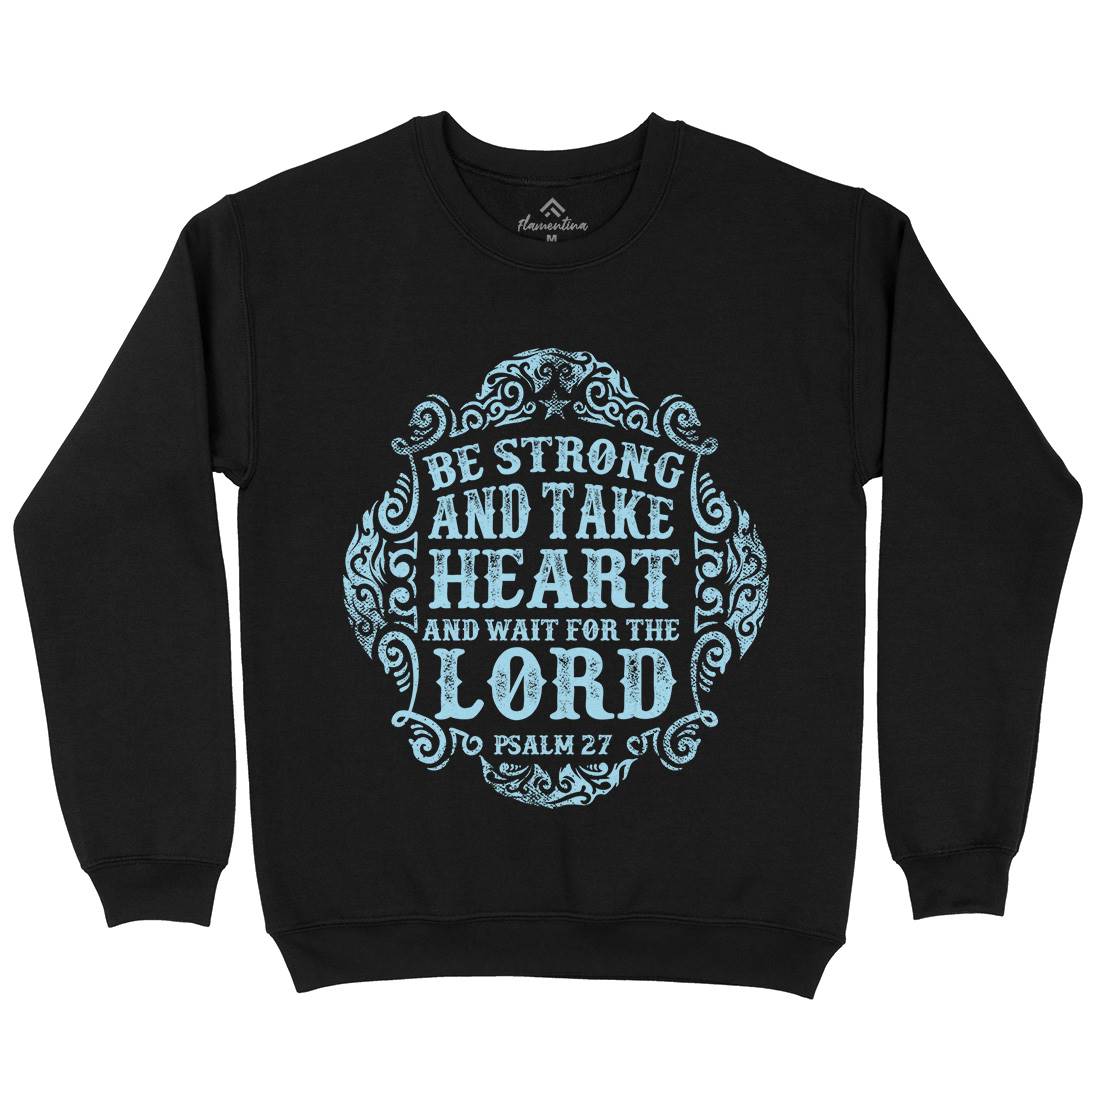 Be Strong And Wait The Lord Kids Crew Neck Sweatshirt Religion C909